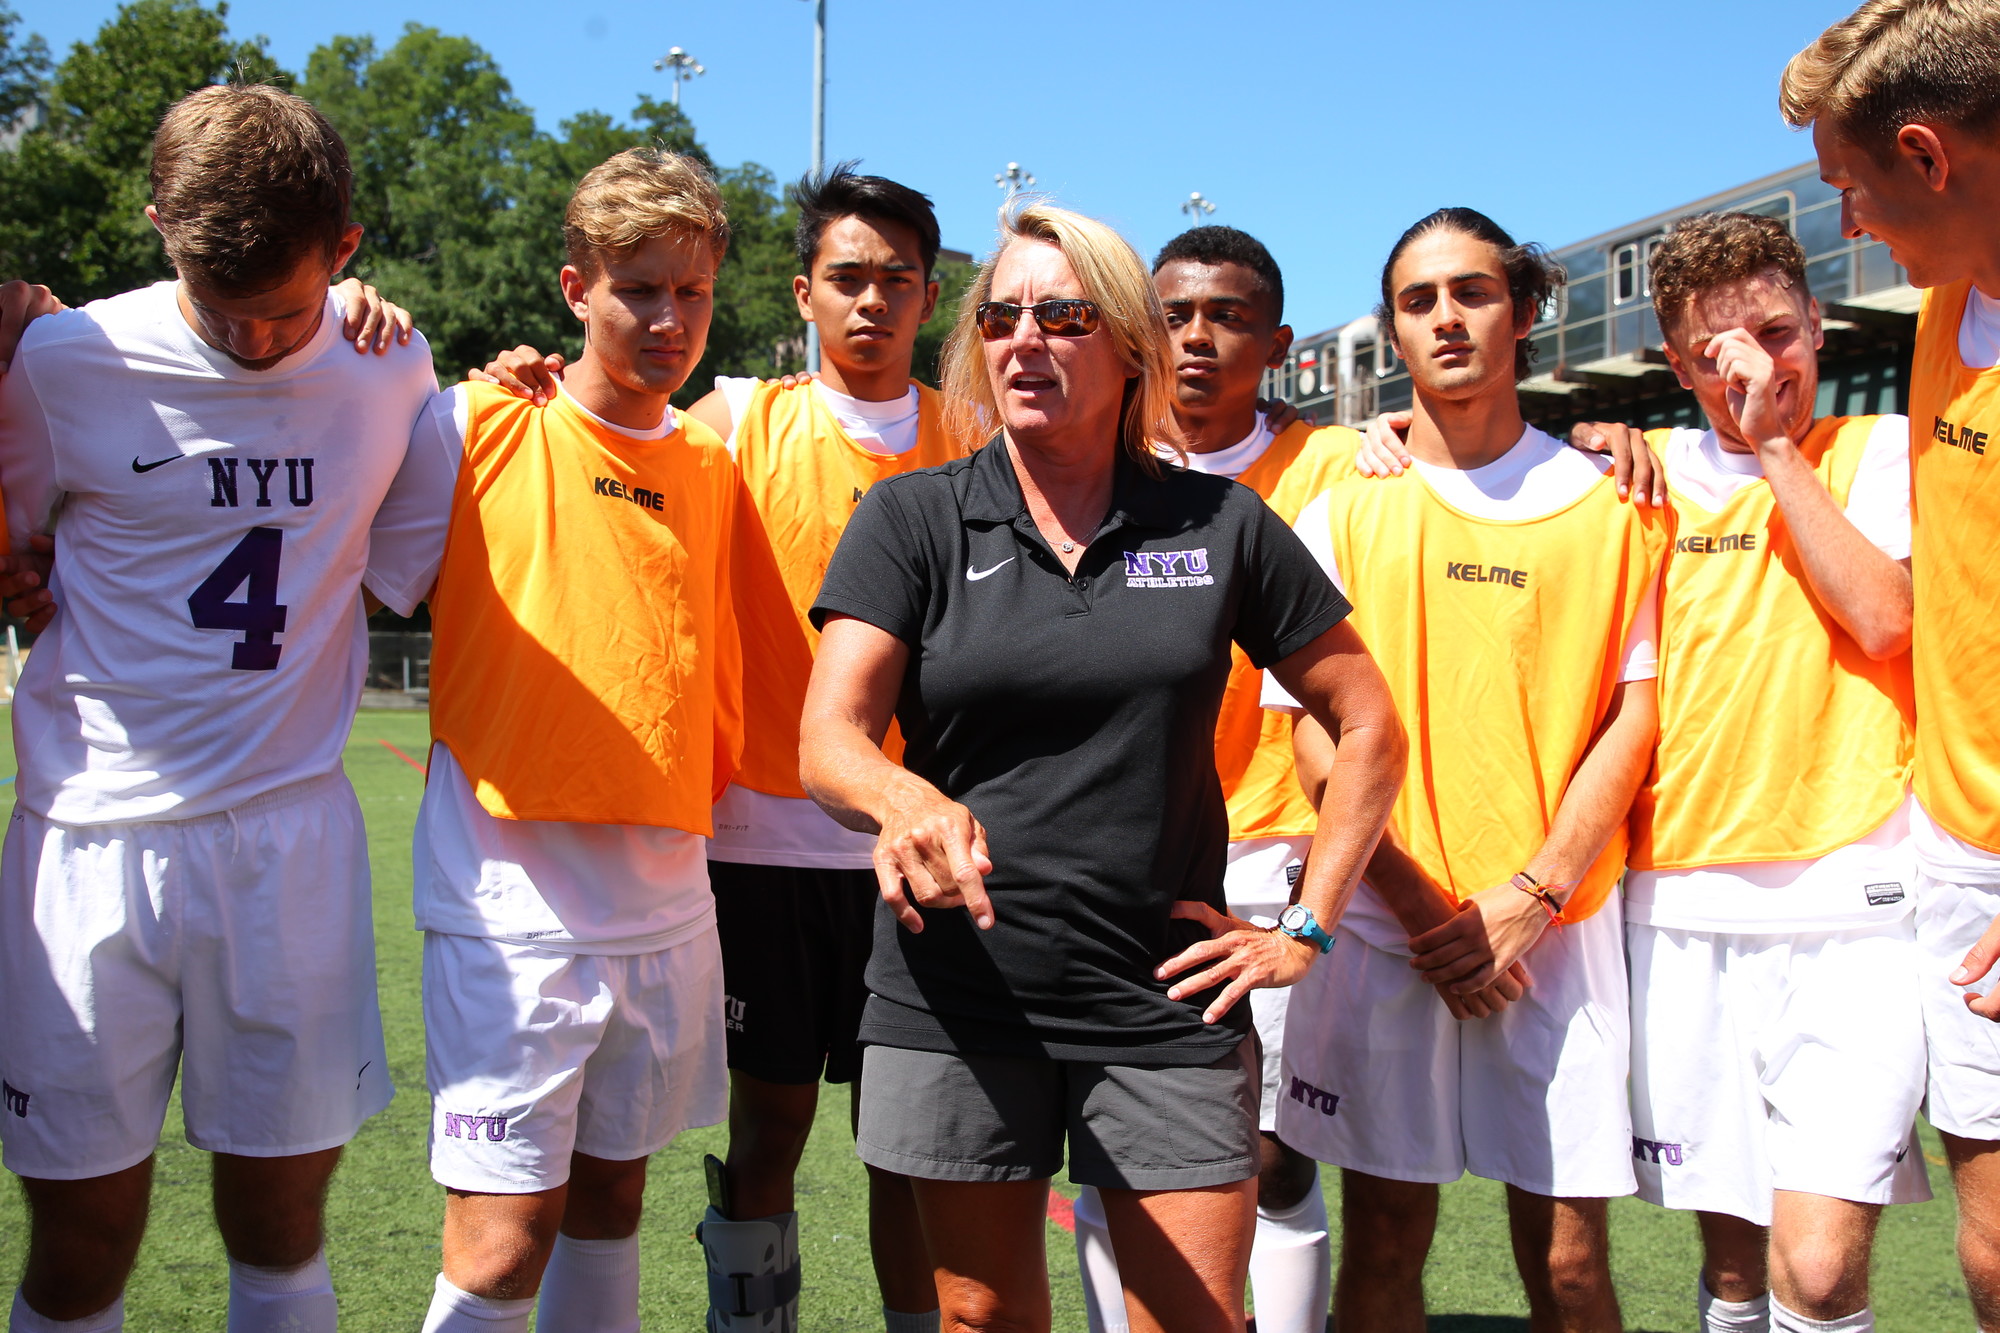 Kim Wyant, of East Meadow, is the only woman serving as head coach of an NCAA men’s soccer team.